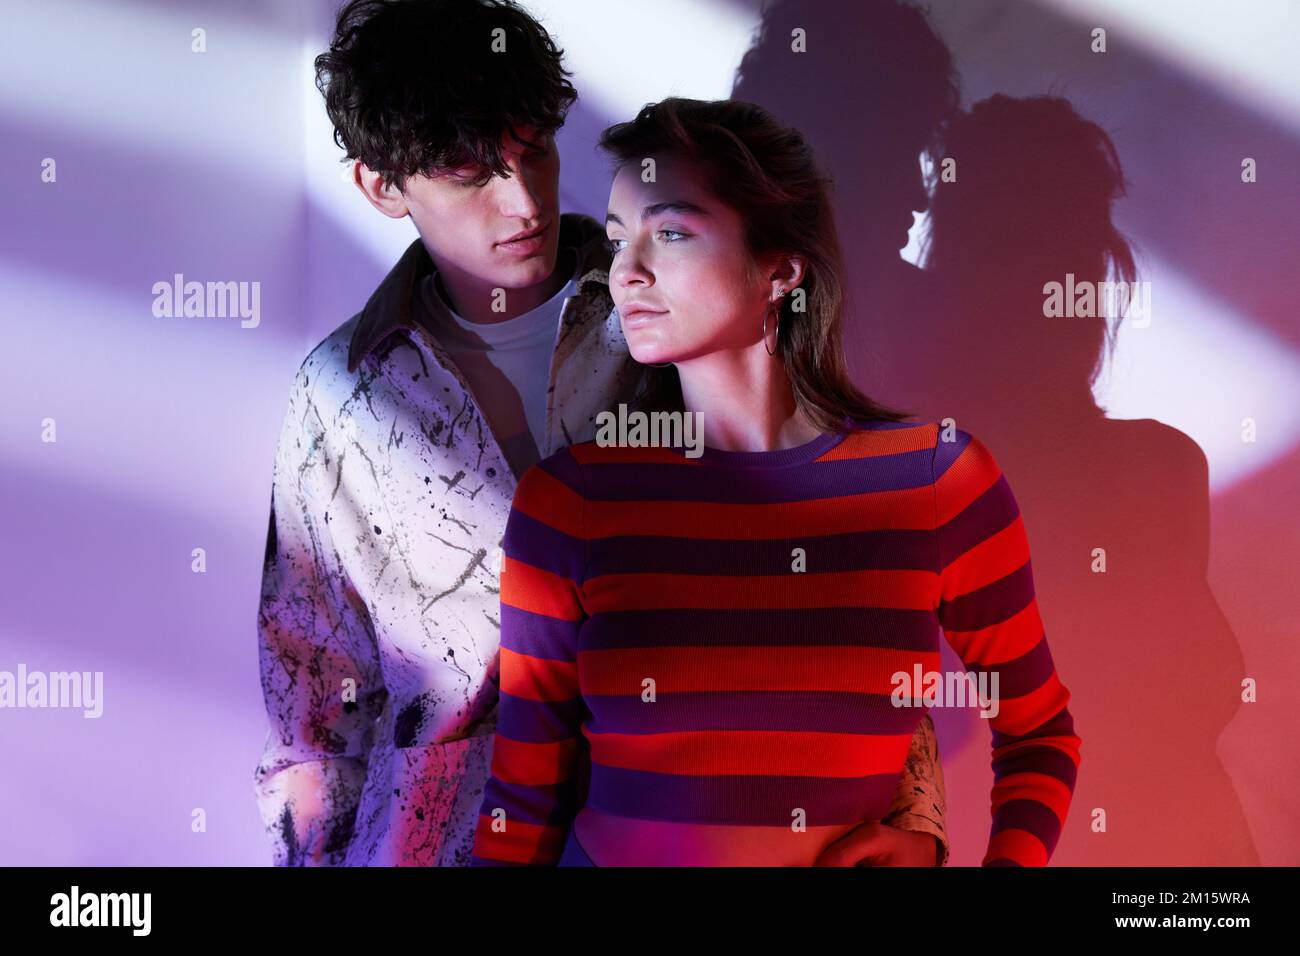 Young models in colorful outfits standing embracing each other near purple wall in neon light in studio Stock Photo